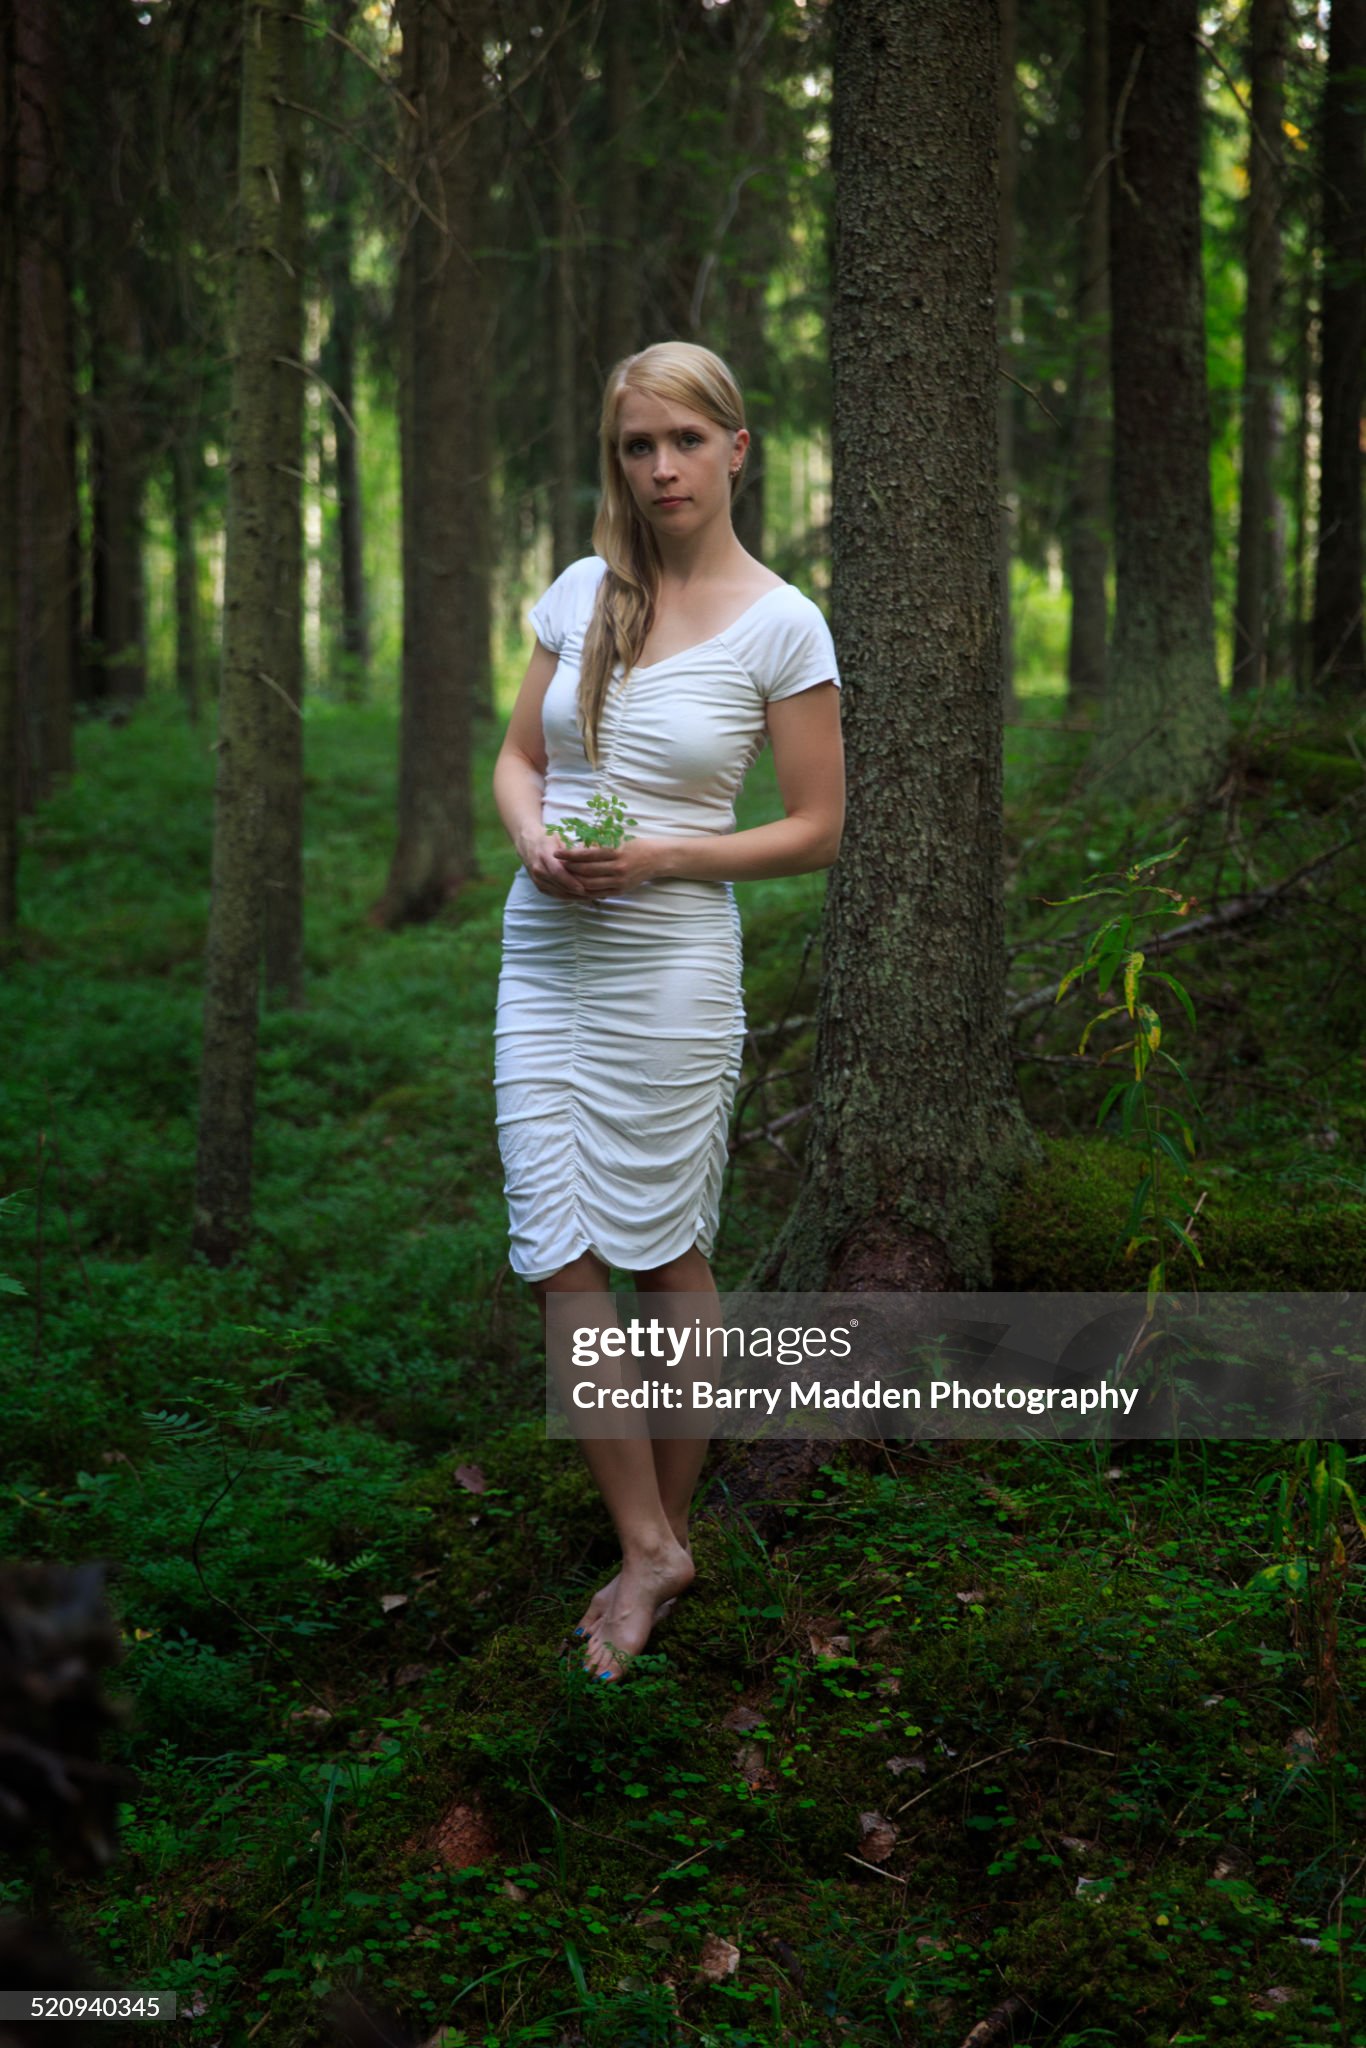 https://media.gettyimages.com/id/520940345/photo/young-woman-standing-in-the-forest.jpg?s=2048x2048&amp;w=gi&amp;k=20&amp;c=Kh2zUtucogTmkeLQH1w1N0xzVm8gHcMednLLEd0i1xE=